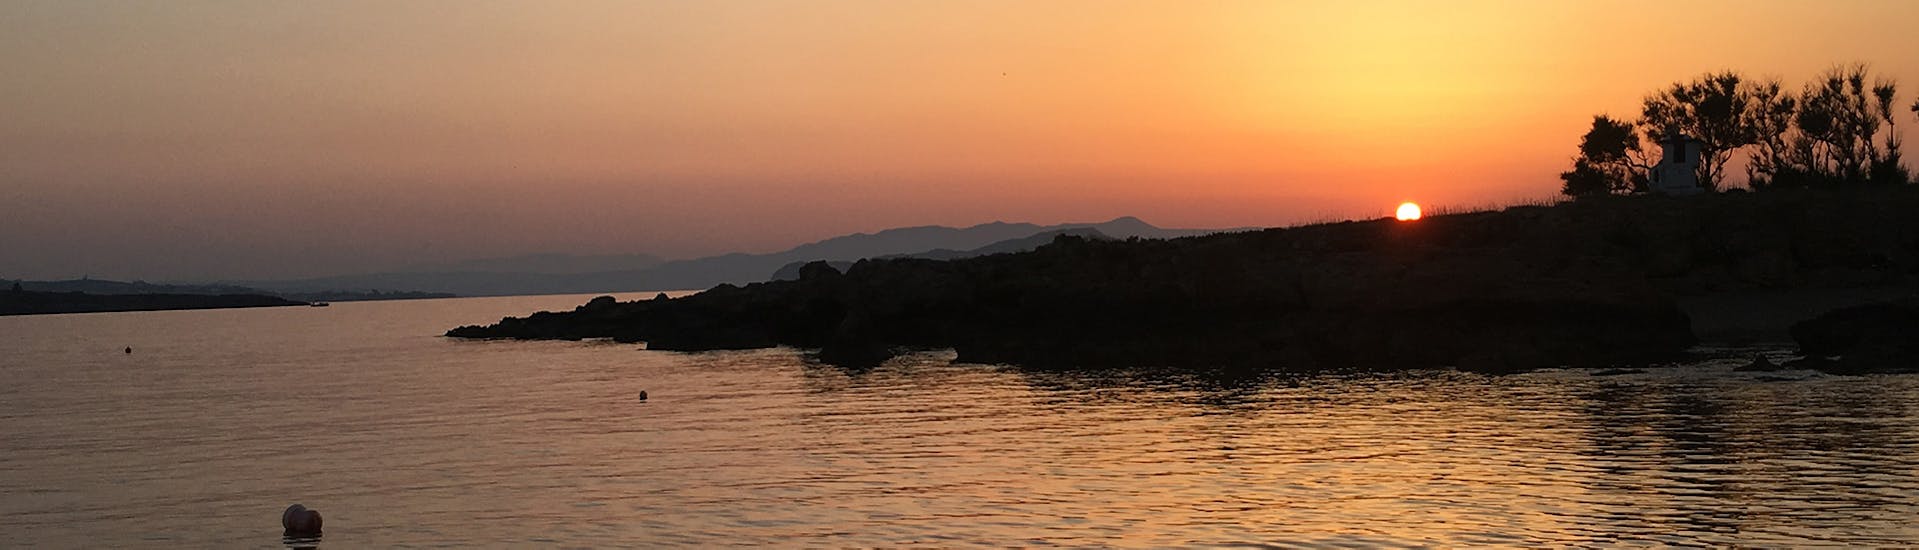 The island where you will go during the Boat Trip from Chania to Lazaretta at Sunset with Manos Cruises Chania.